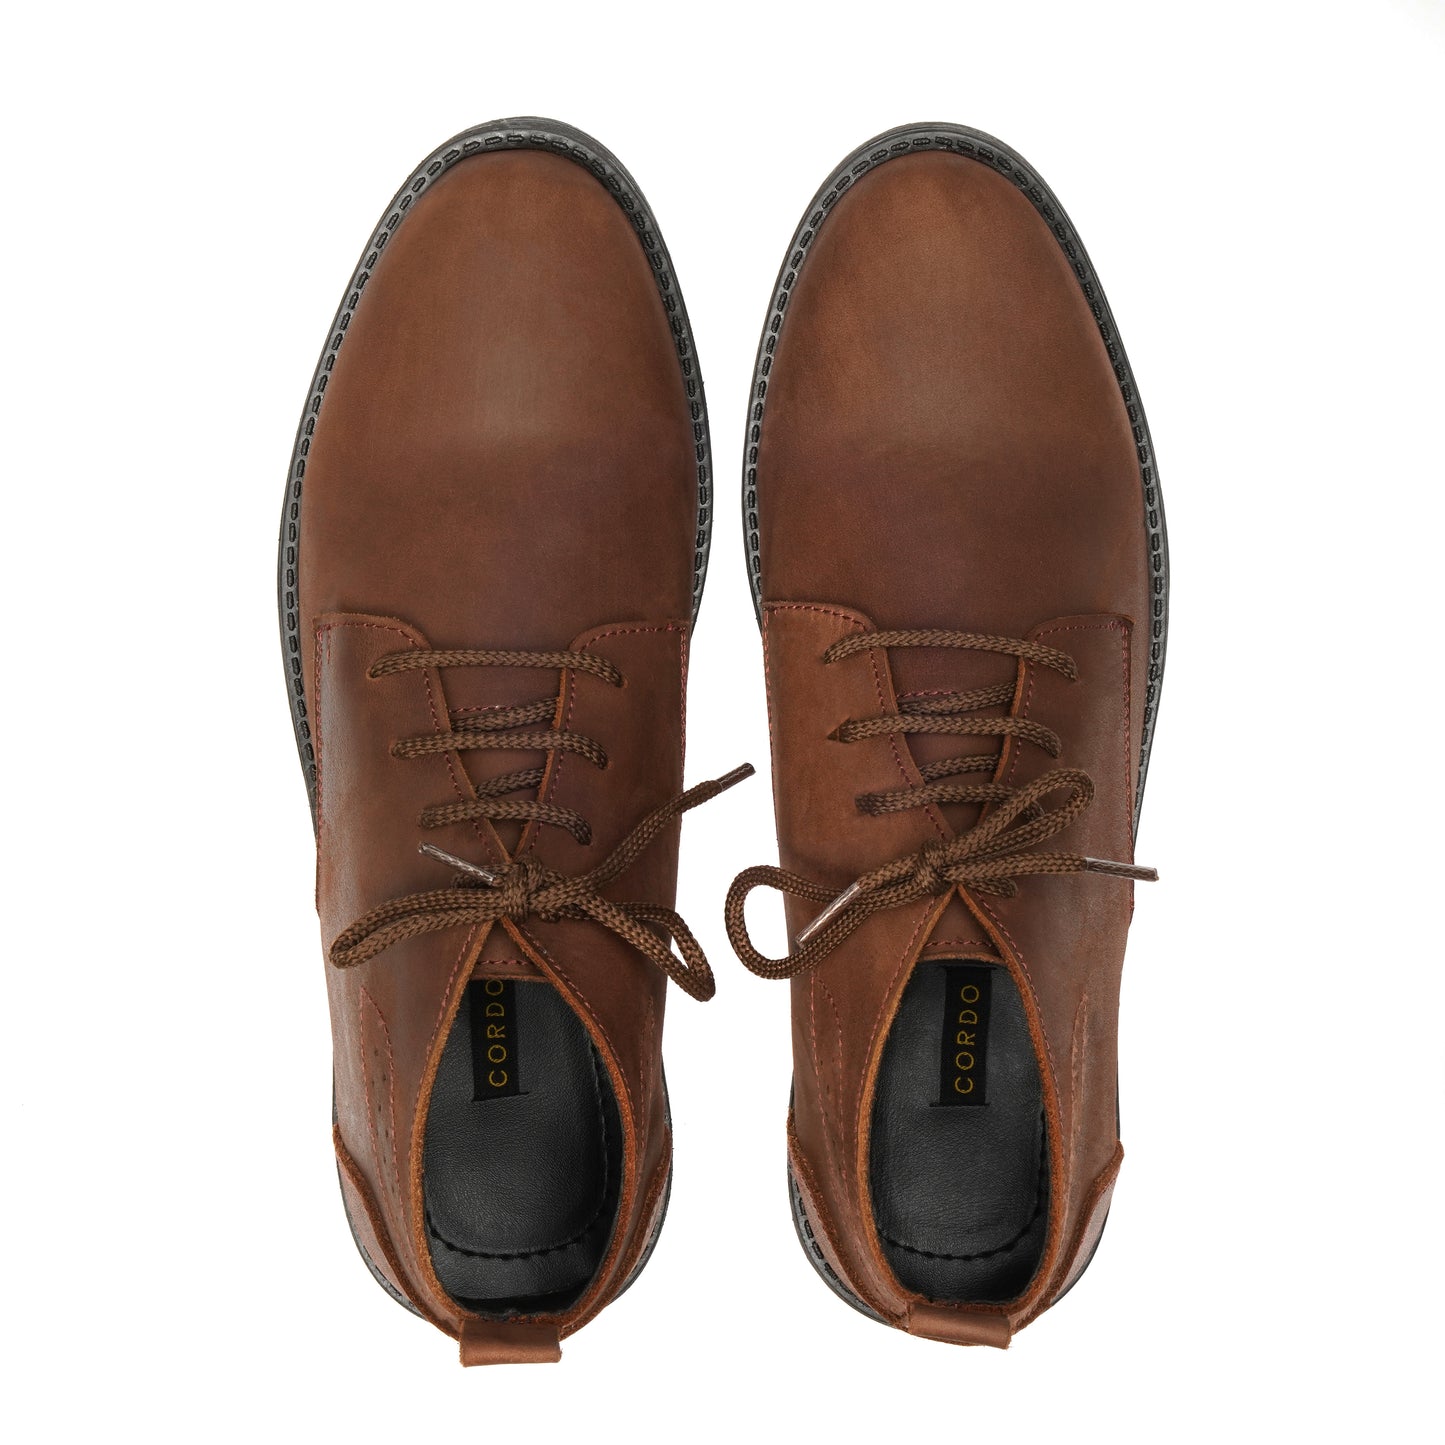 CS004-Oily Brown Cow Leather Chukka Boots